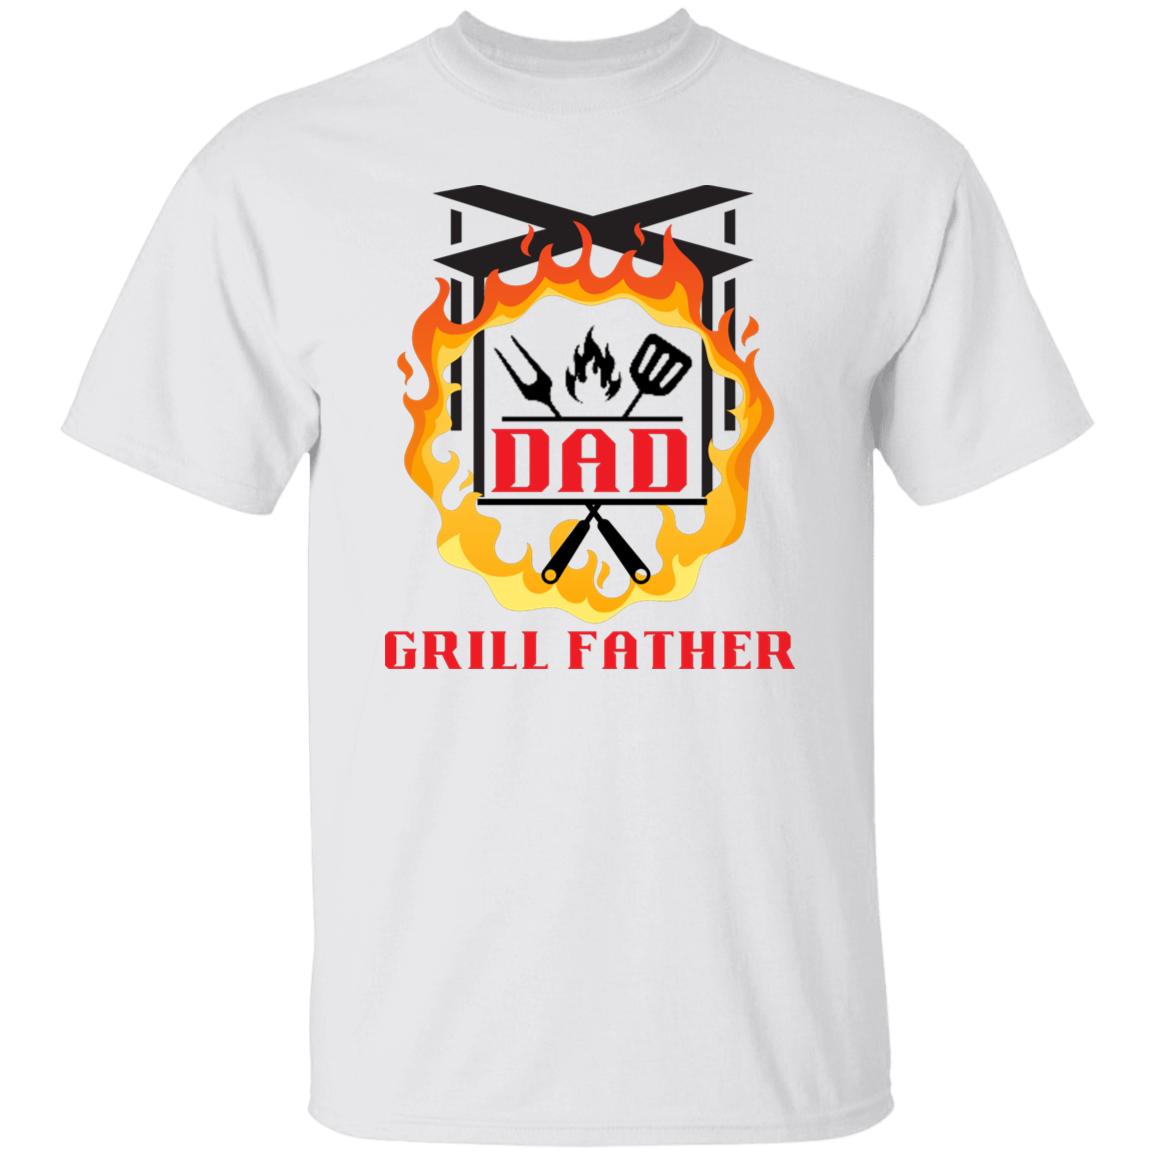 Grilling Dad t's